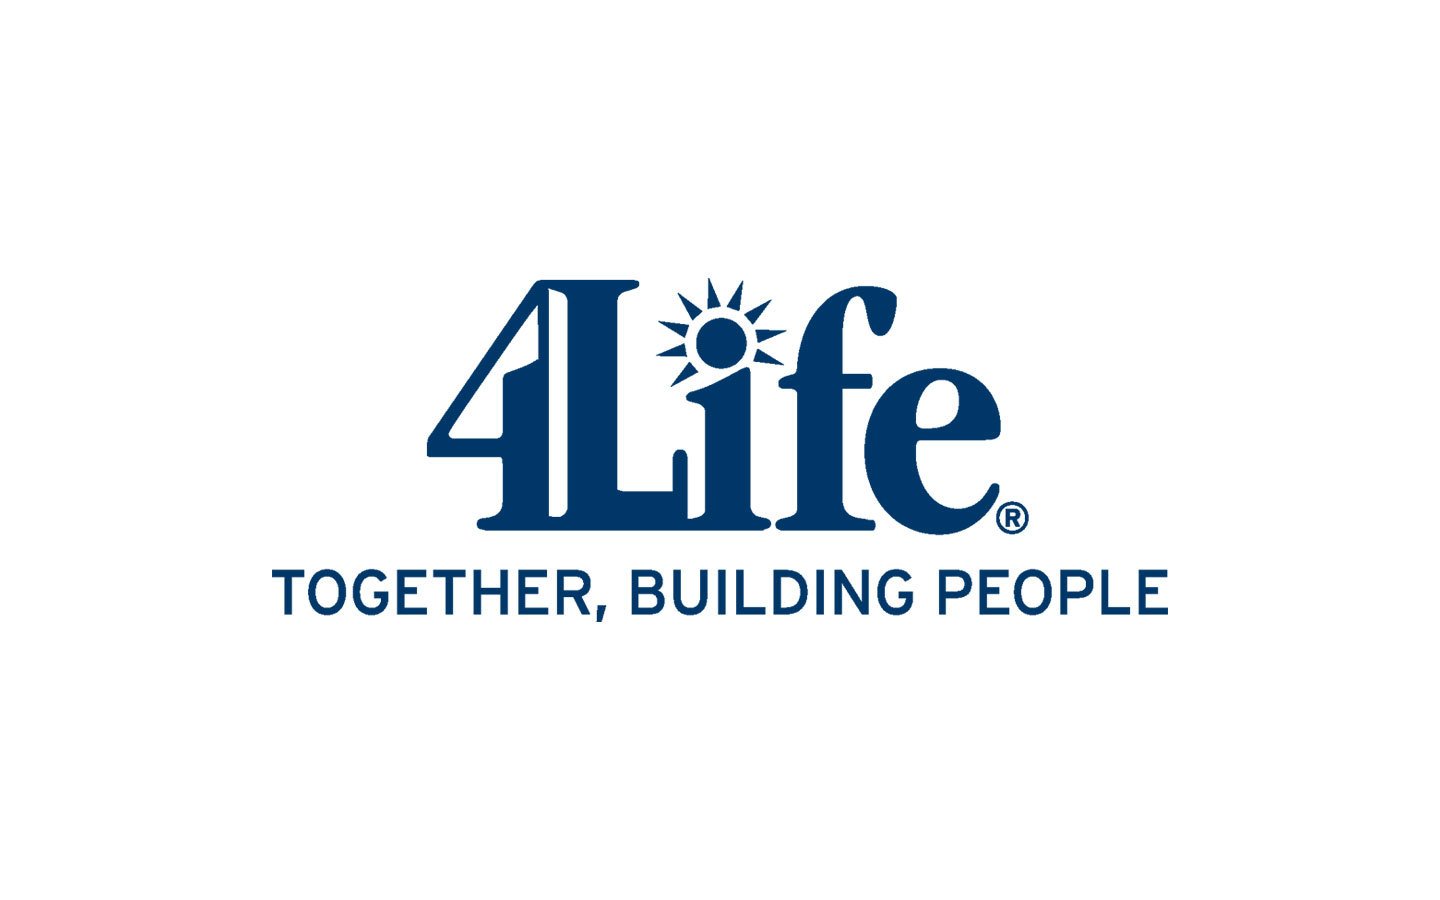 Young 4 life. 4life research. Логотип компании 4life. Логотип 4life immune. 4life research банки.